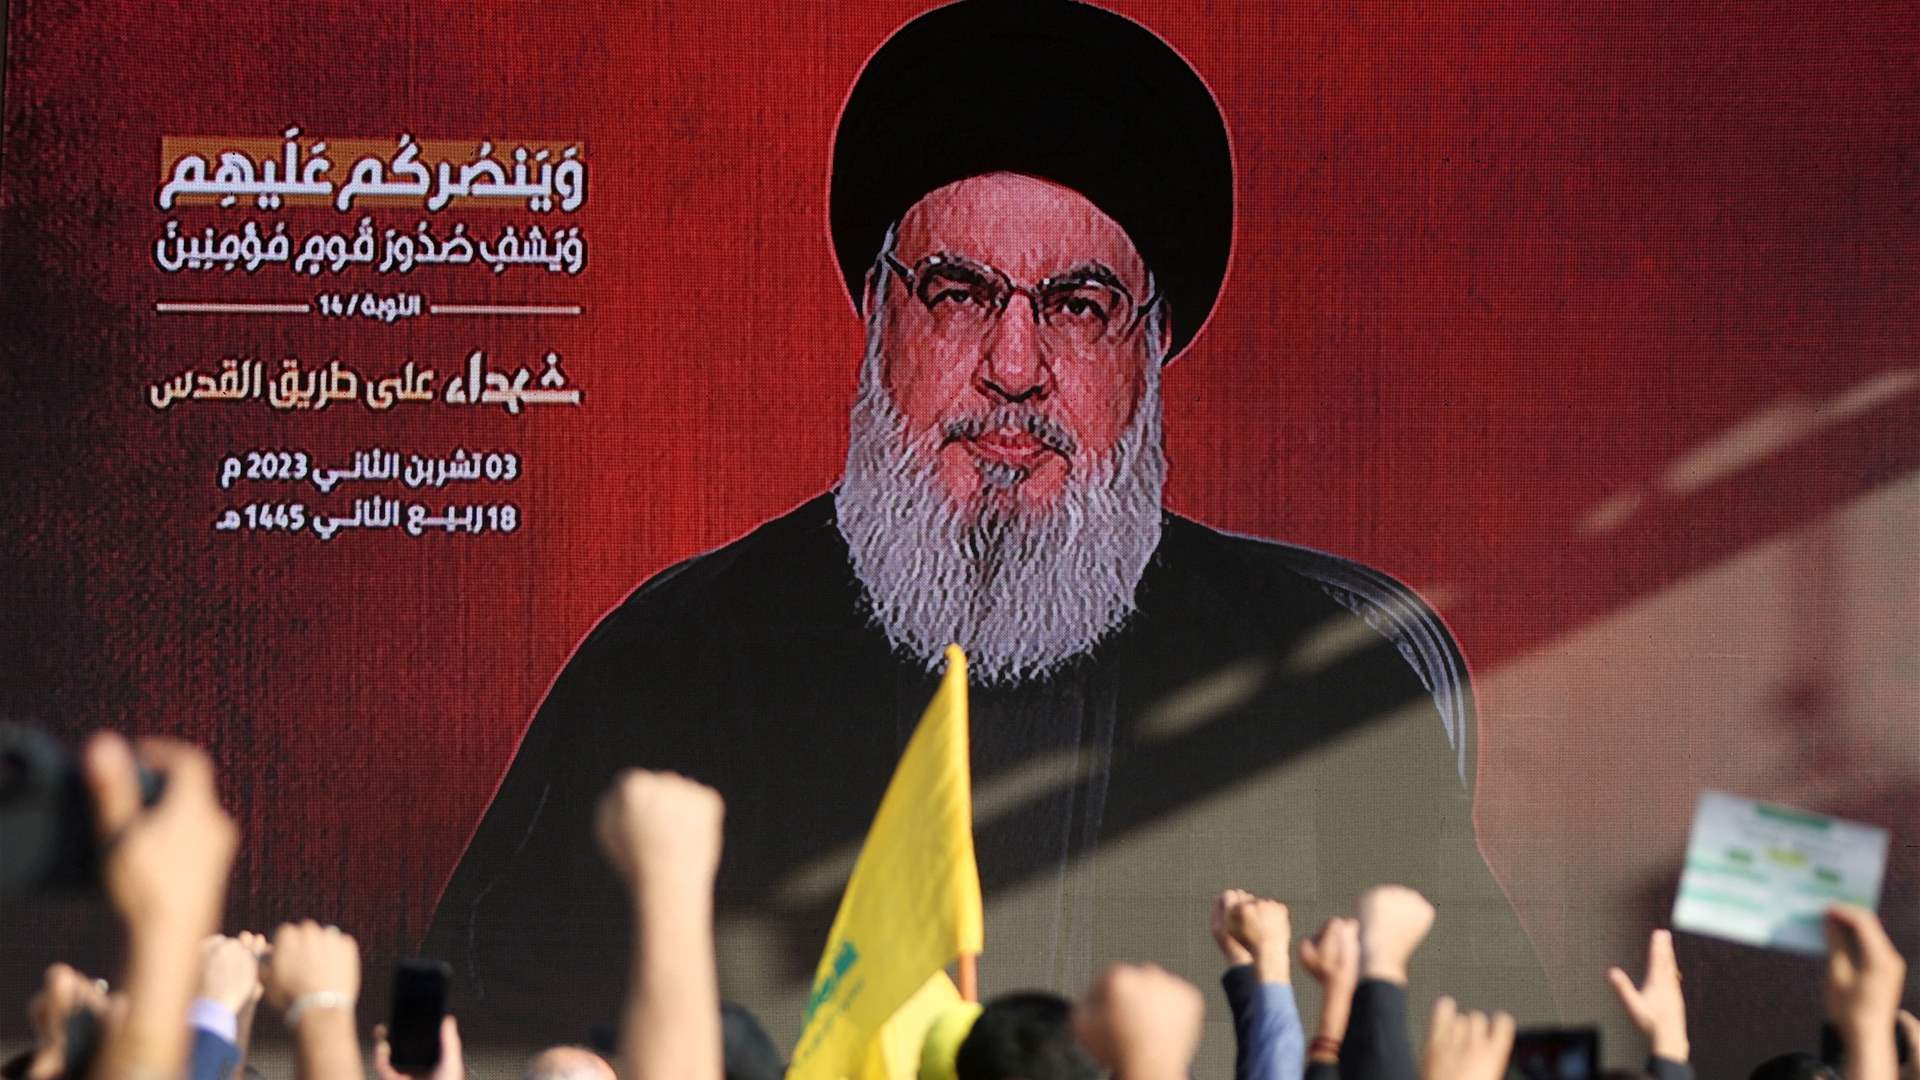 Hezbollah&#39;s Secretary-General Sayyed Hassan Nasrallah set to speak next Saturday at 3 PM on the occasion of Martyr&#39;s Day